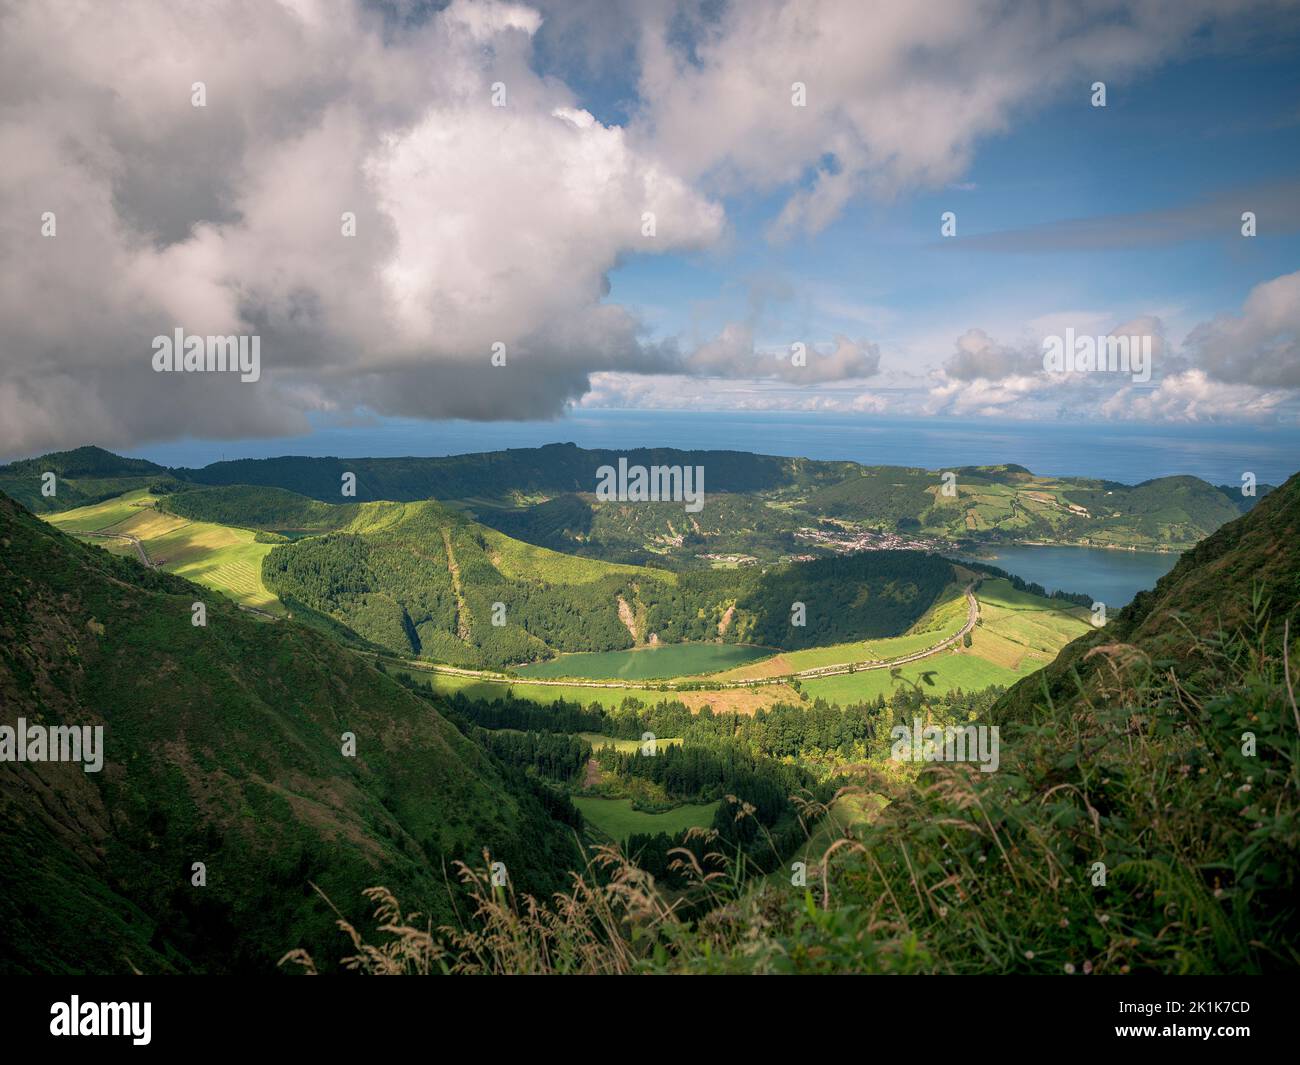 Rugged coastline of the Portuguese Azores islands in the Atlantic ocean. The islands are lined with lush rain forests and rugged volcanic rocks. Stock Photo